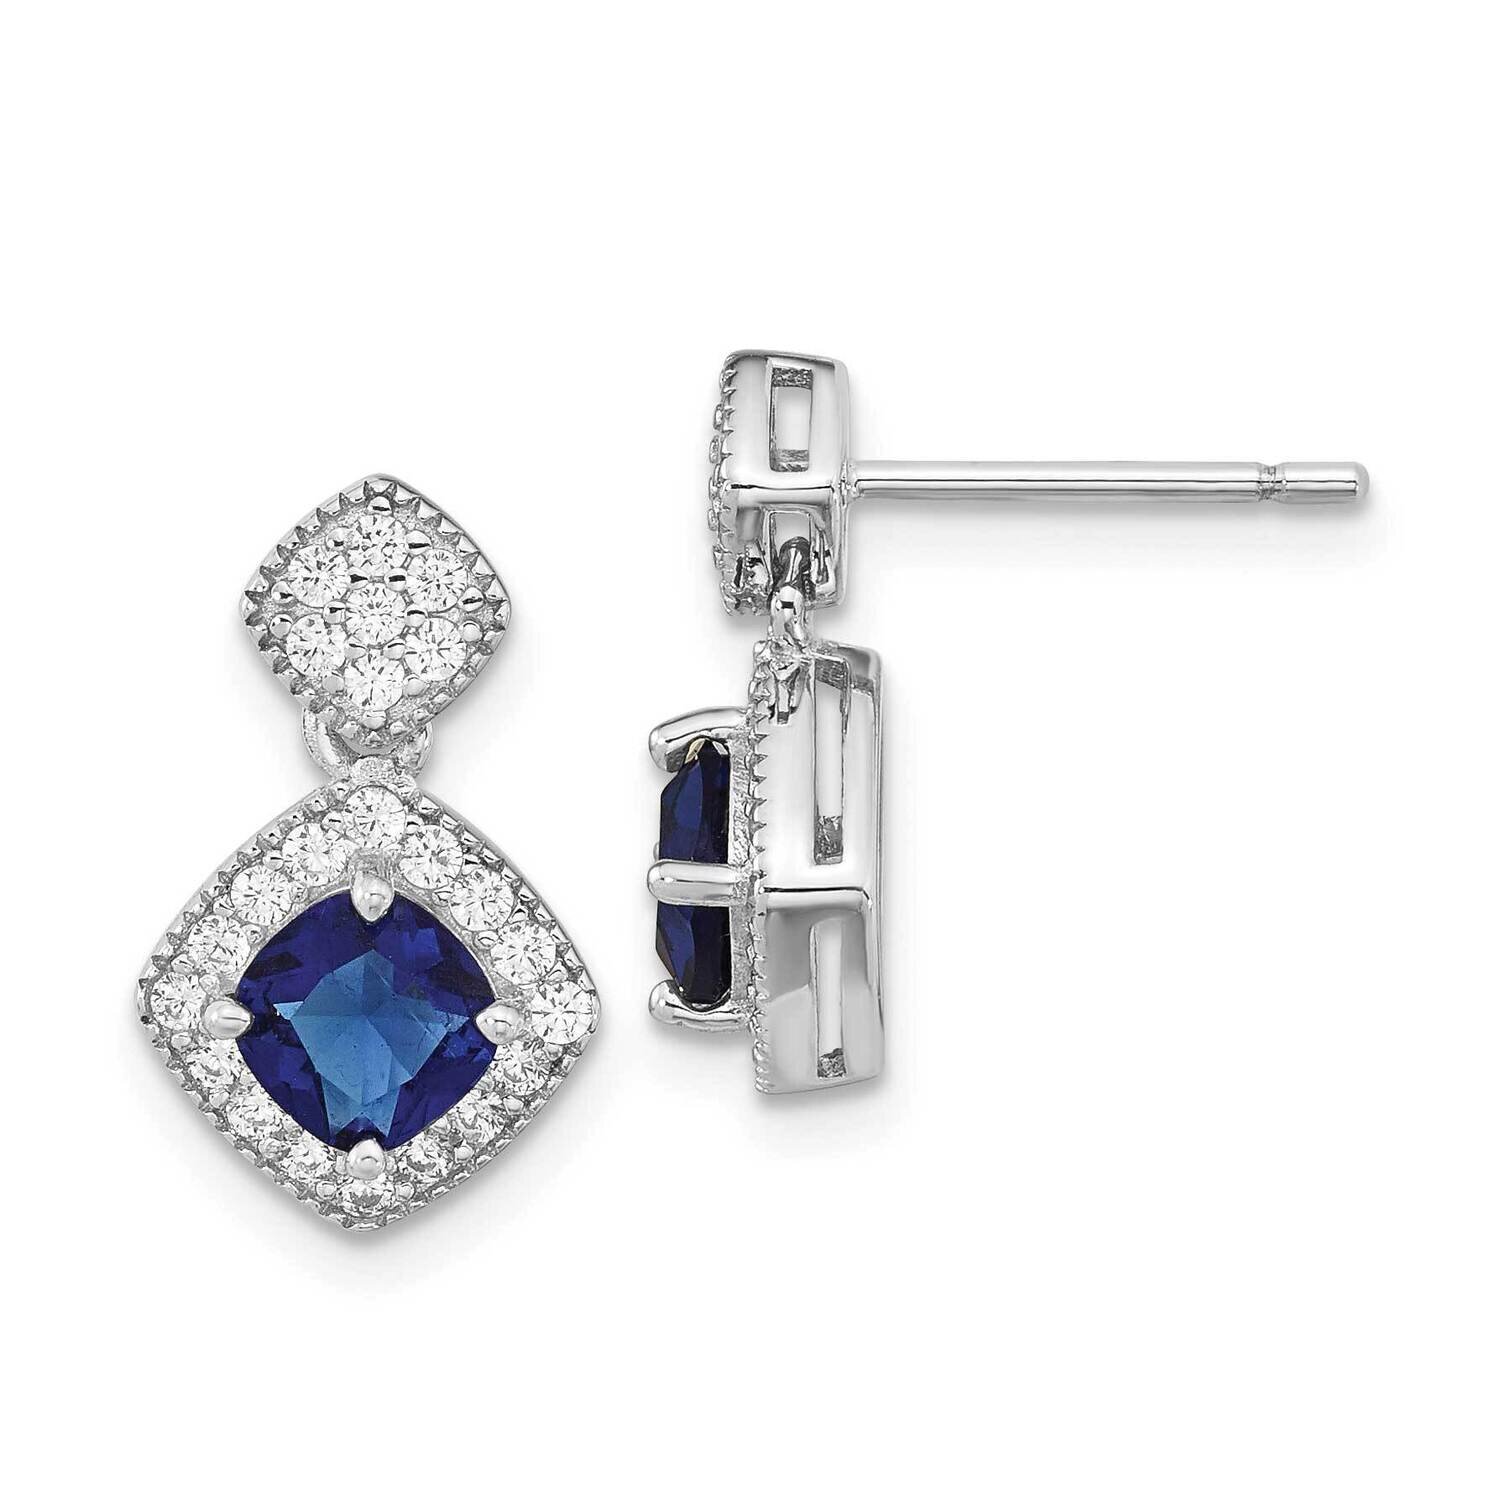 Cheryl M Rhodium-Plated Blue Glass and CZ Diamond Post Earrings Sterling Silver QCM1518